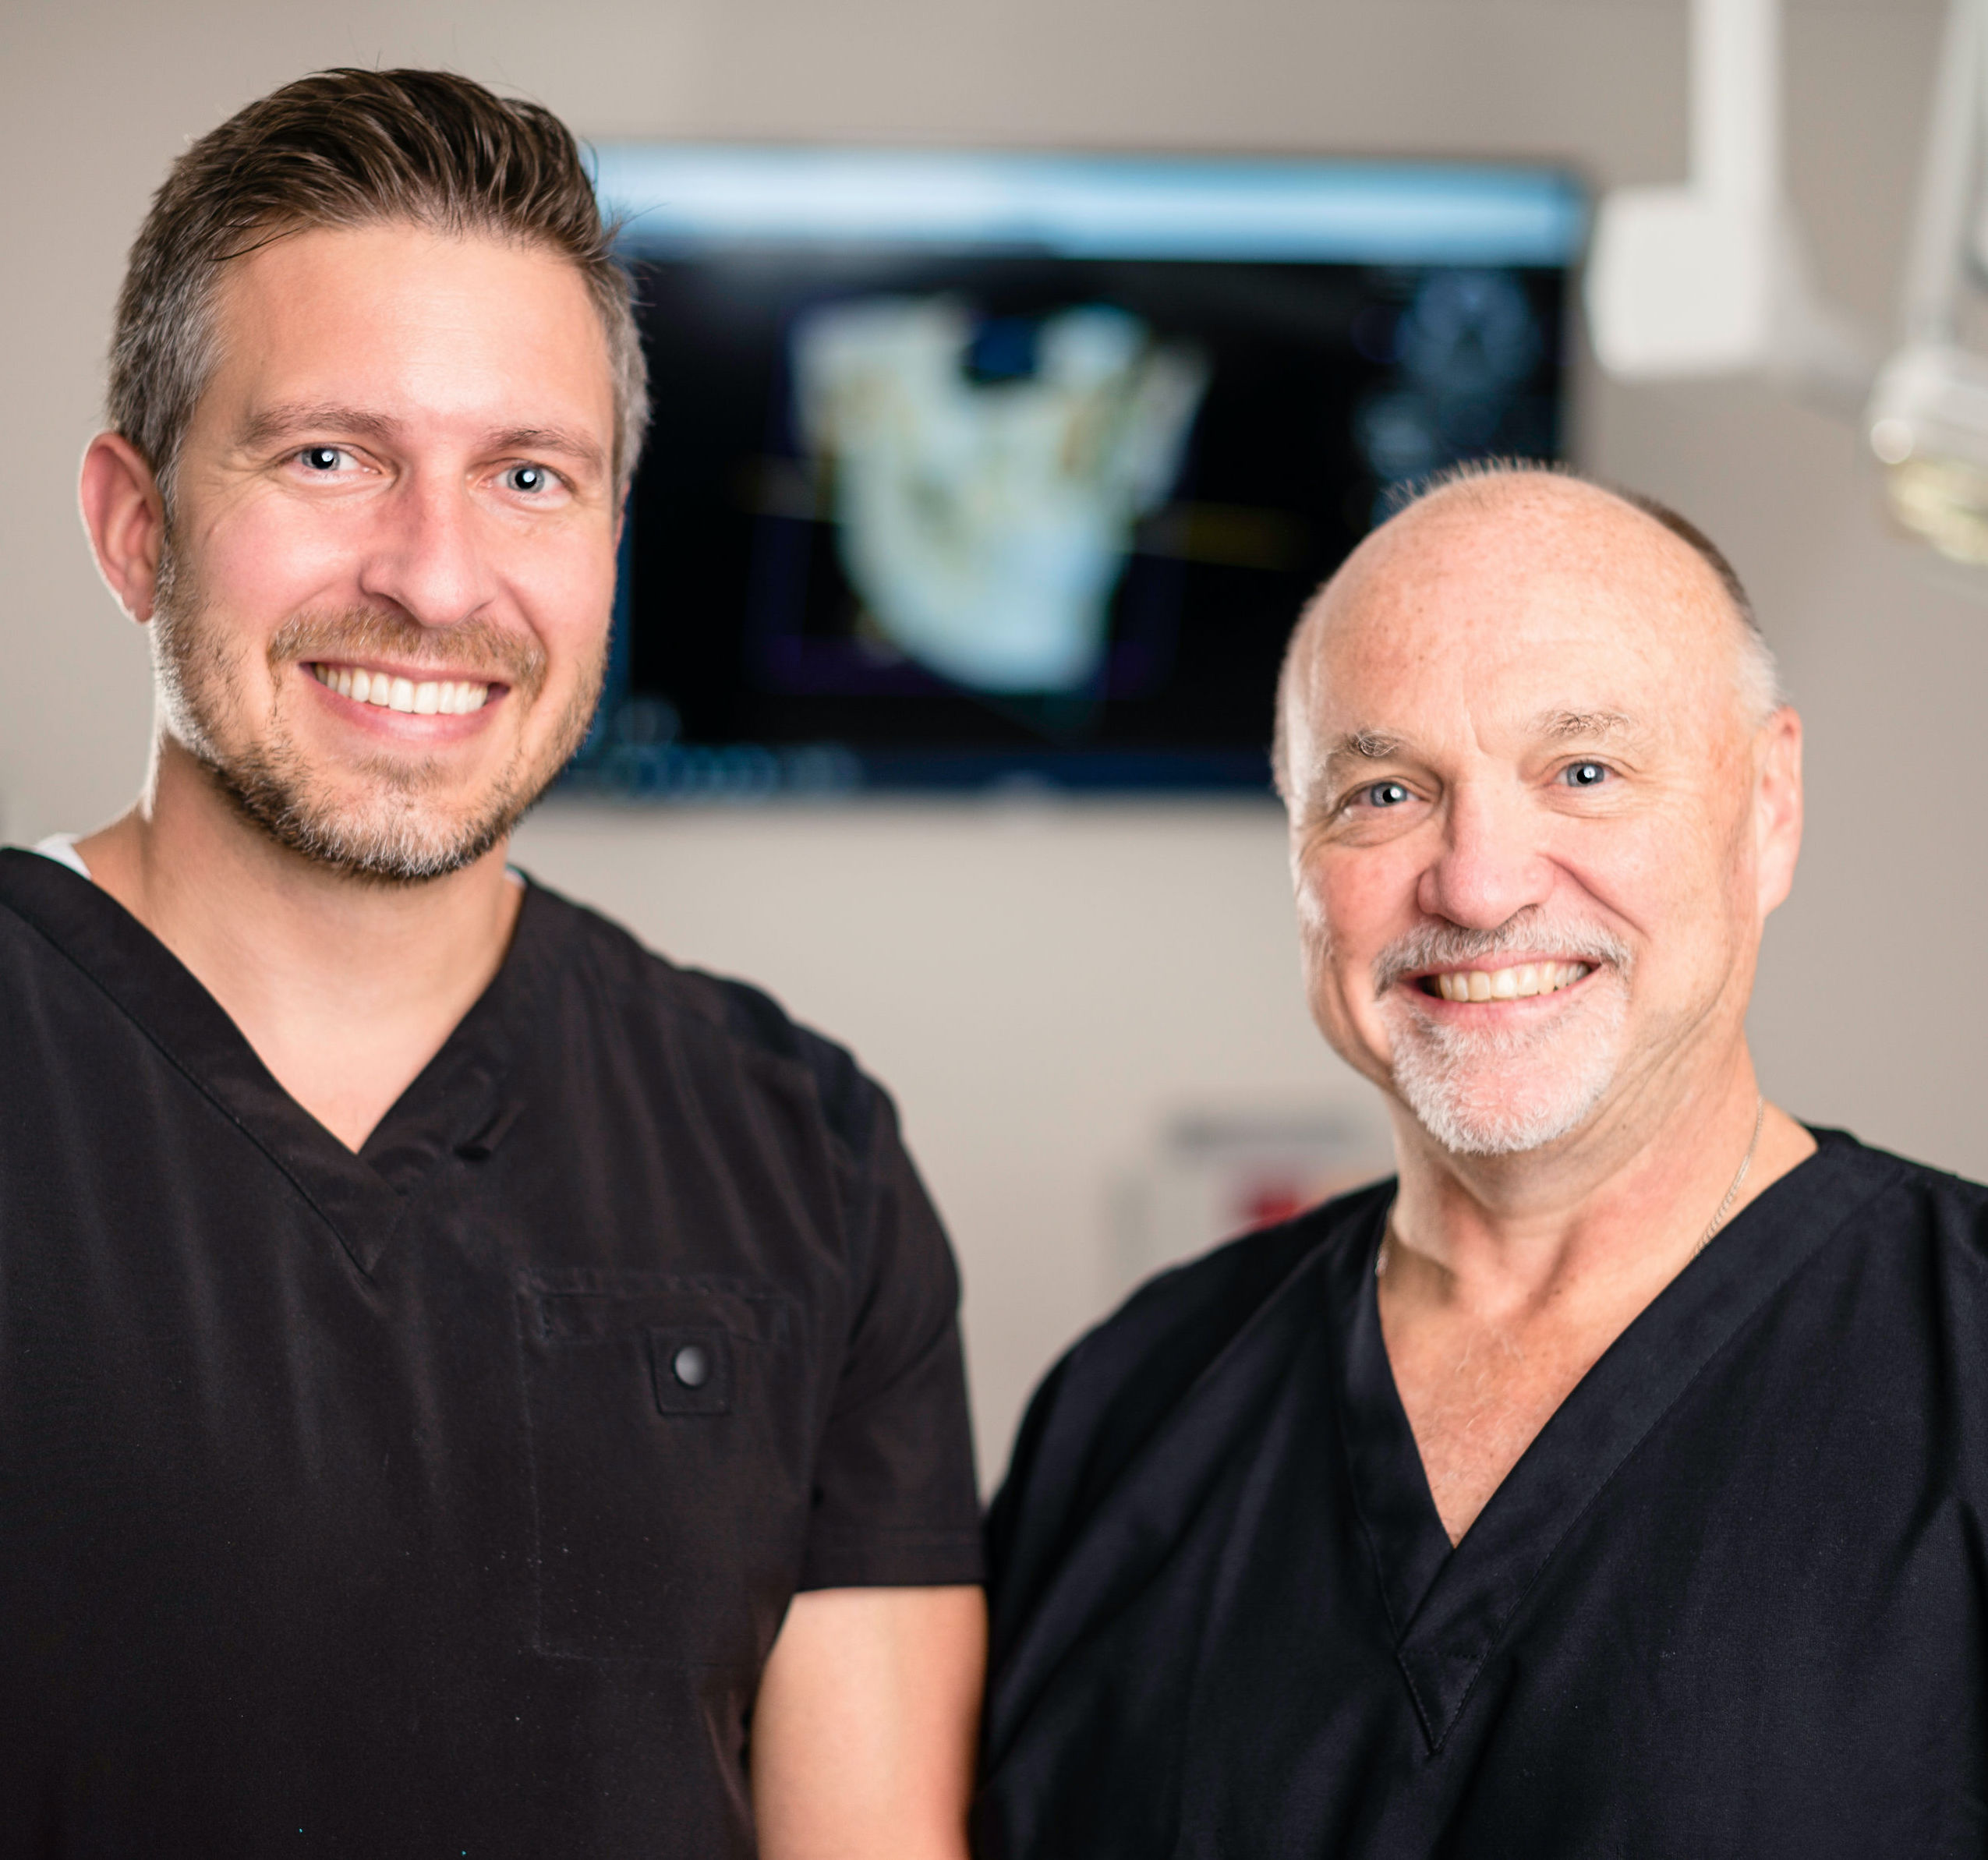 Andrew Johnson, DDS, MDS, CDT, FACP; and Scotty Bolding, DDS, MS Headshot